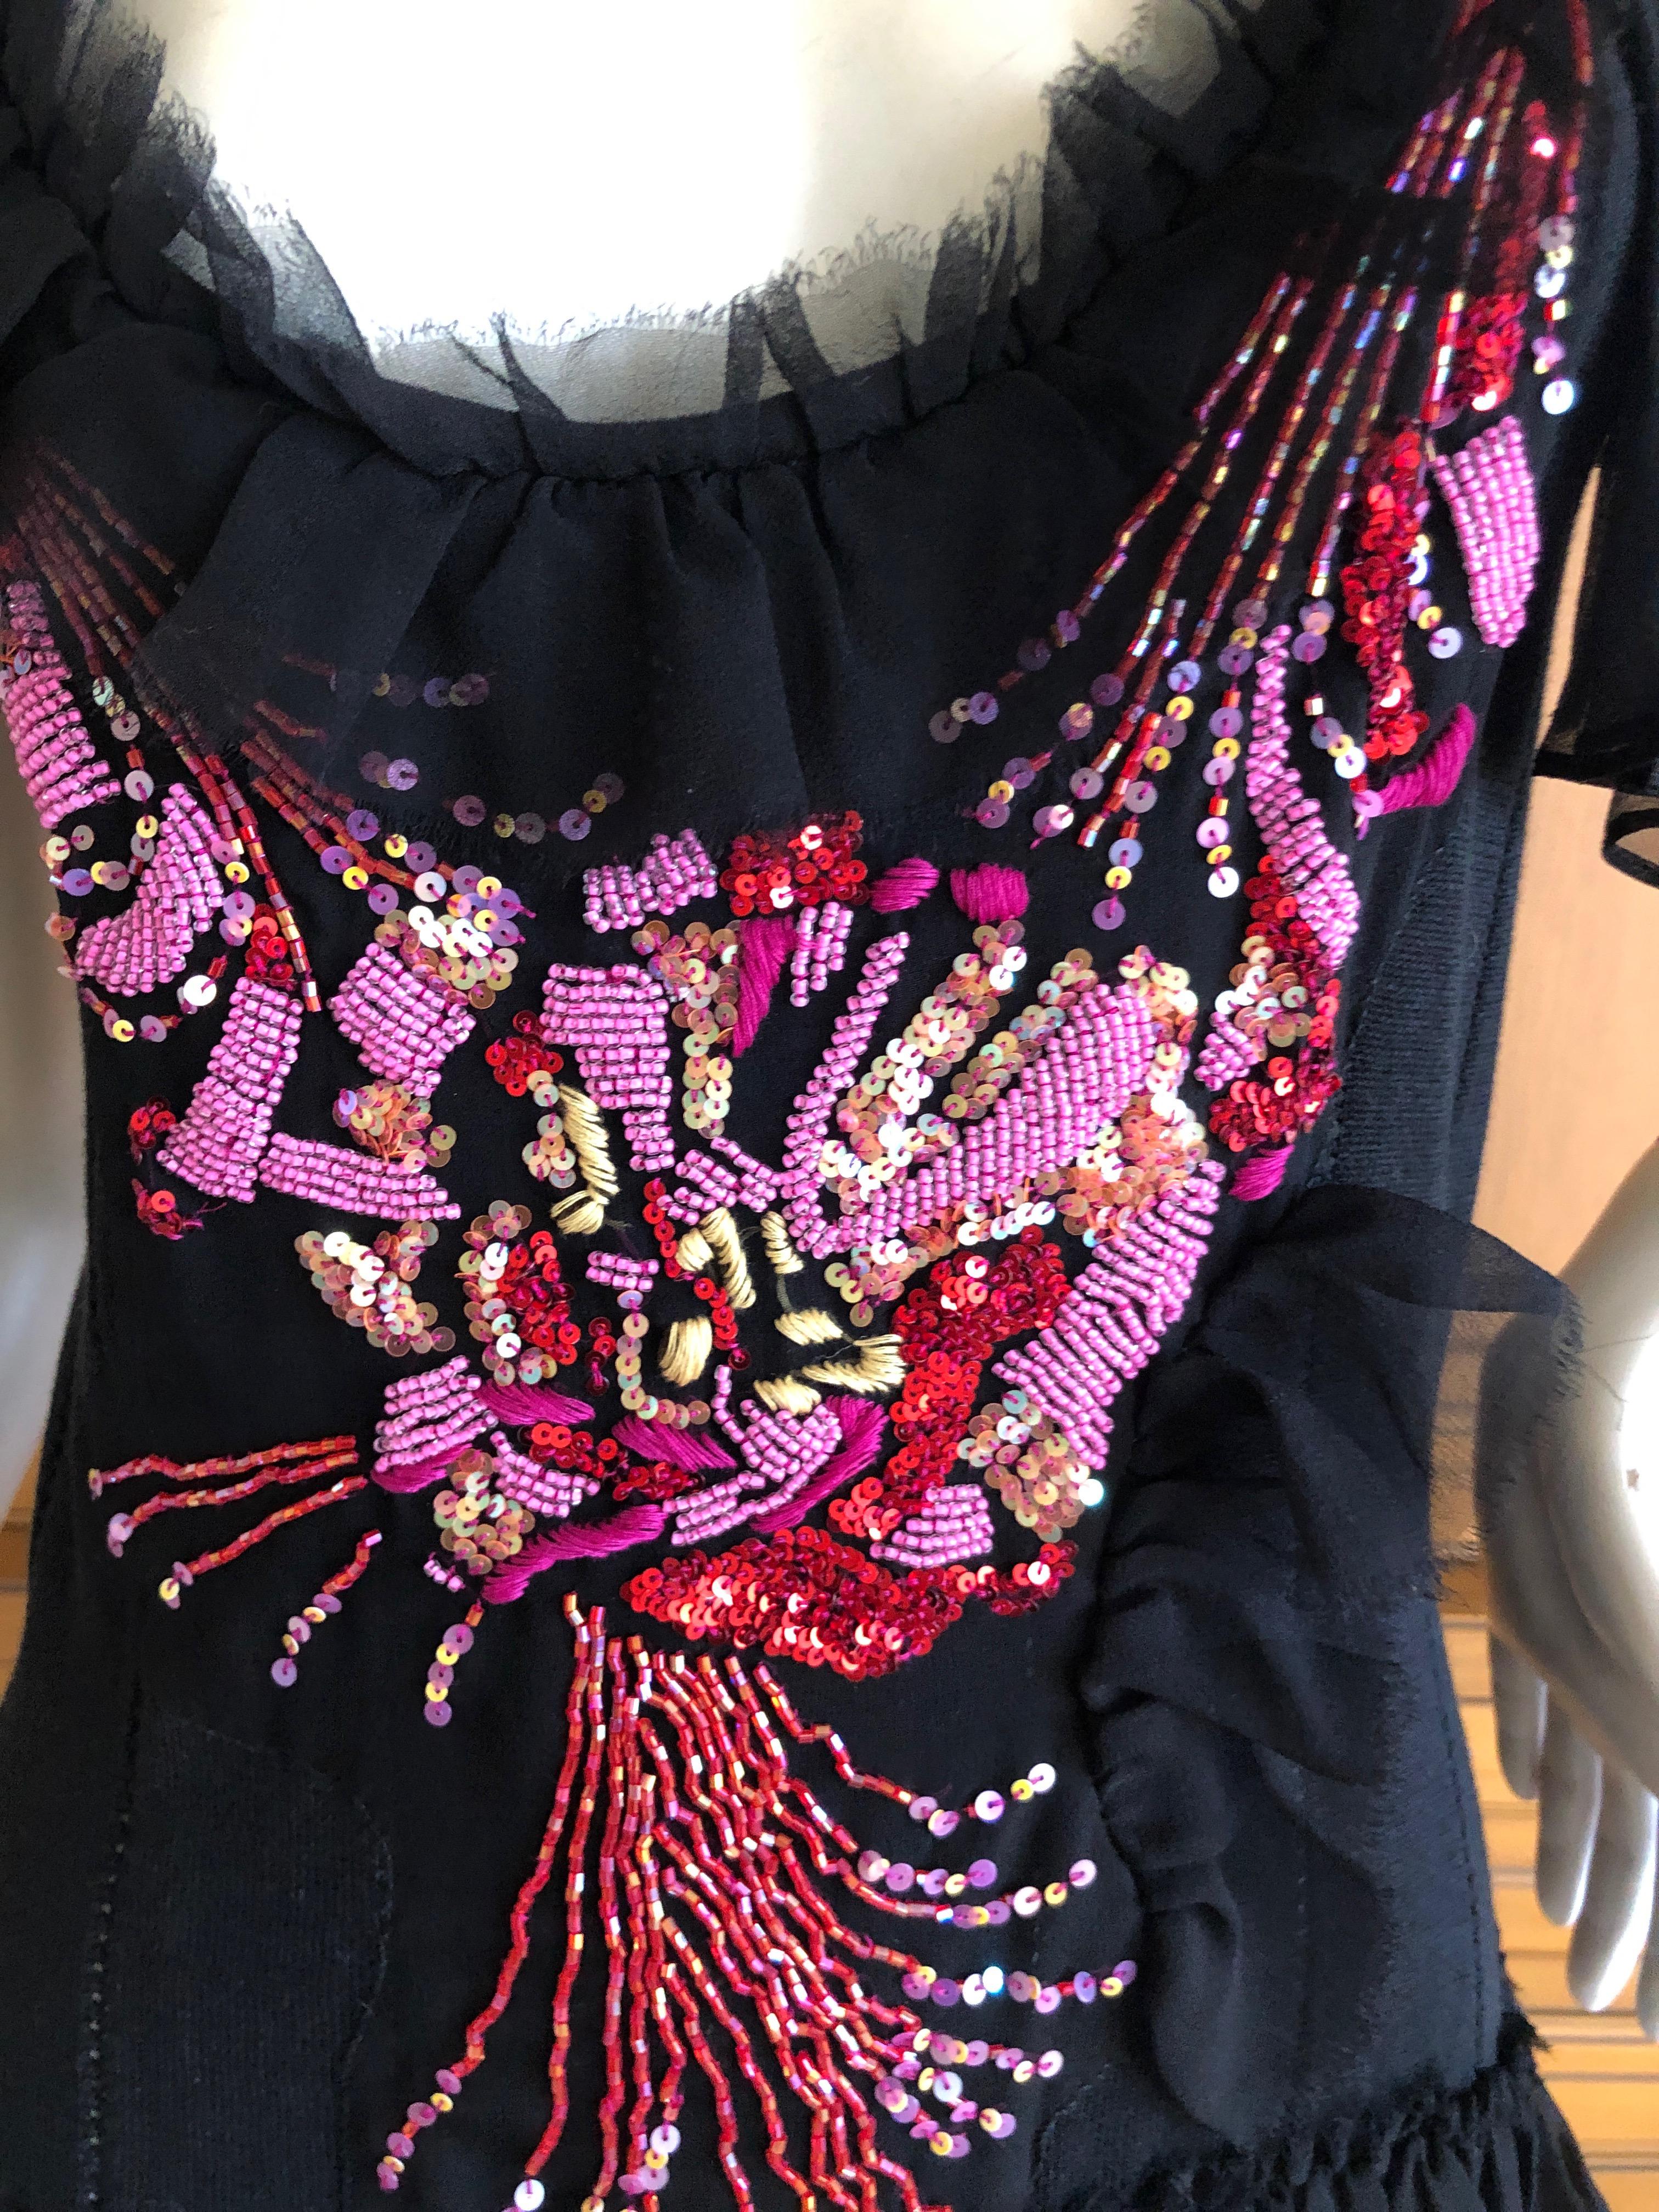 Christian Lacroix Vintage Silk Bead Flower Bouquet Embellished Sleeveless Top In Excellent Condition For Sale In Cloverdale, CA